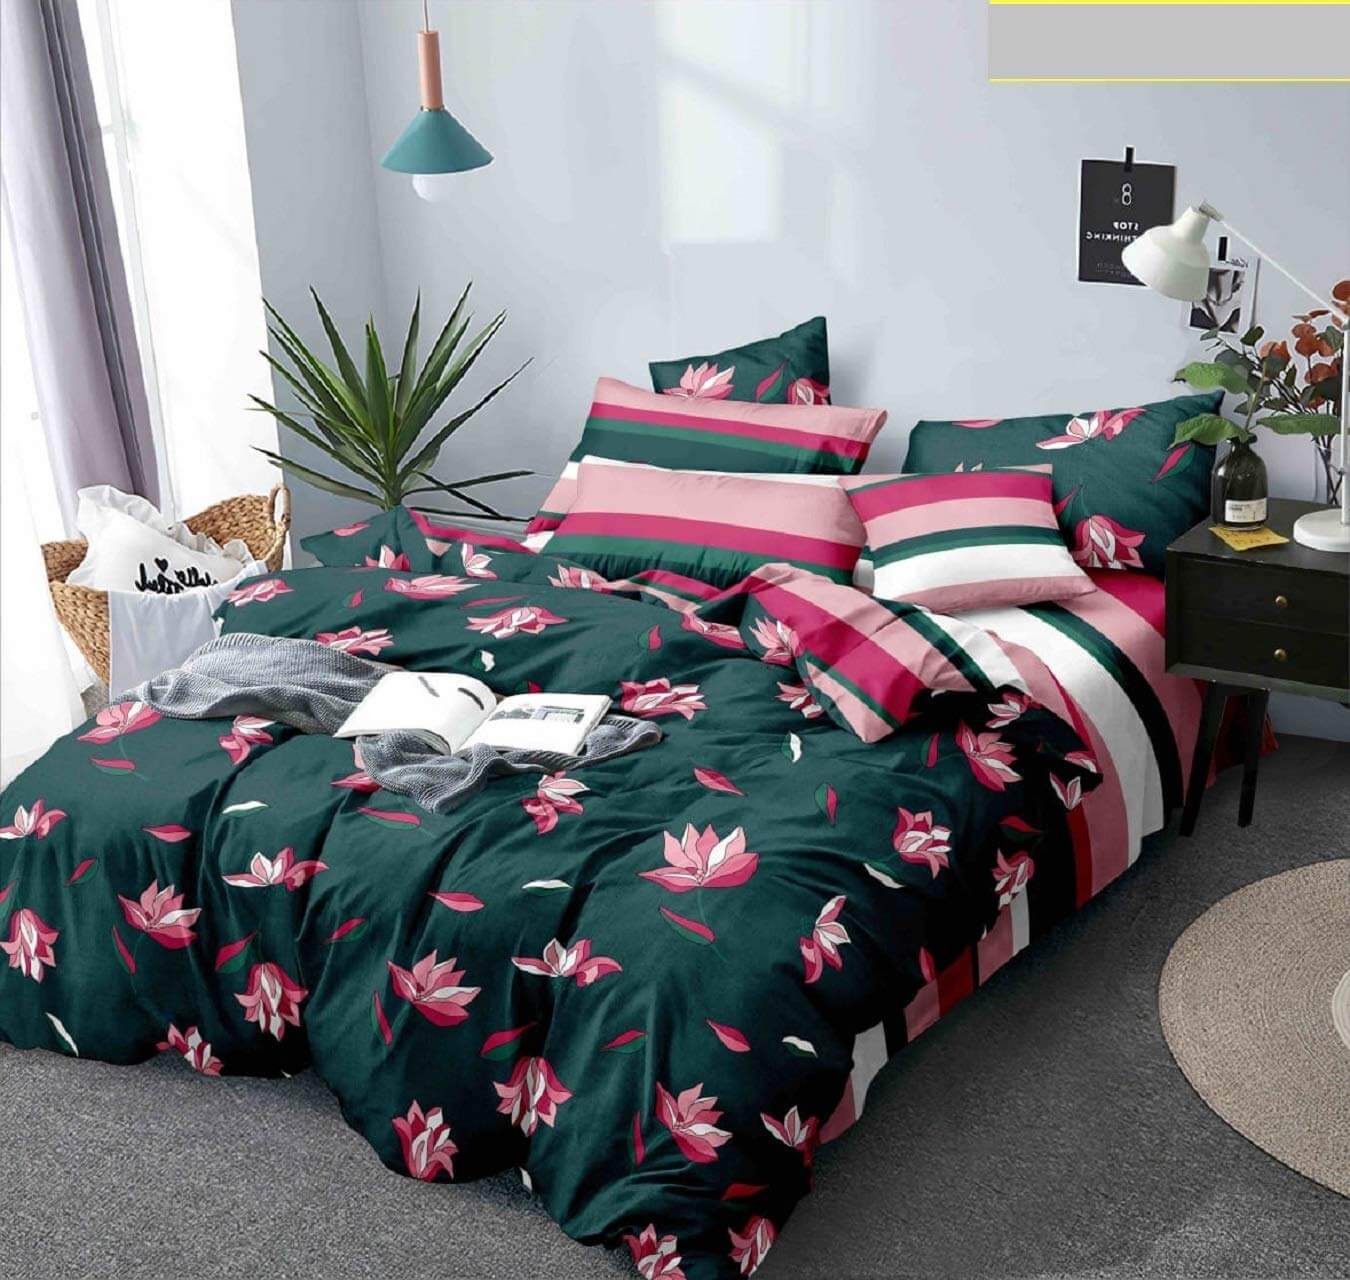 5- Choose a flowery and colorful bedding